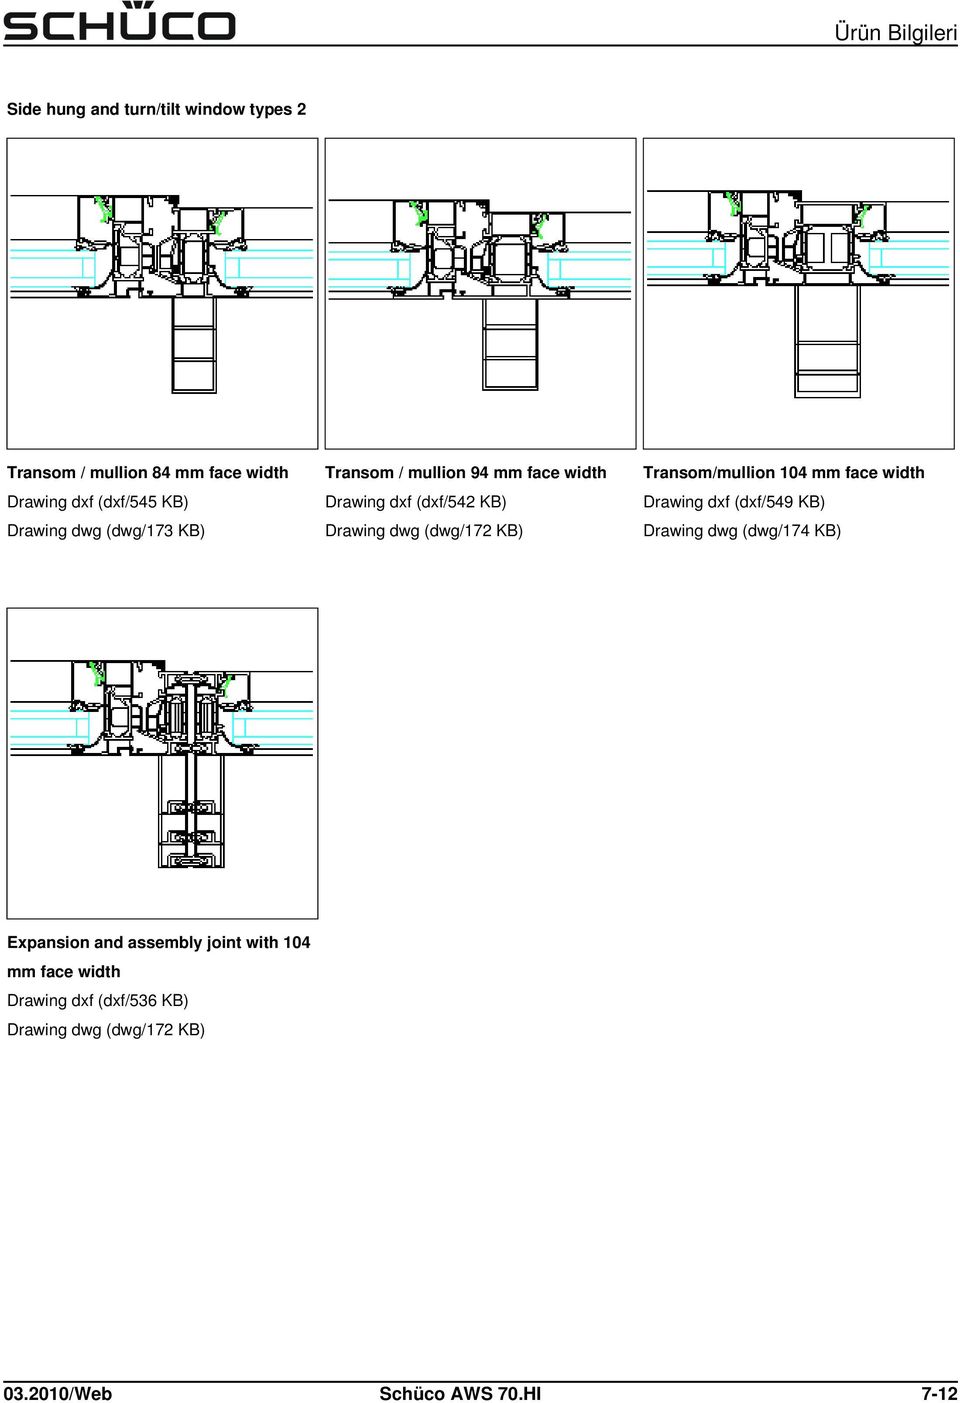 Transom/mullion 104 mm face width Drawing dxf (dxf/549 KB) Drawing dwg (dwg/174 KB) Expansion and assembly